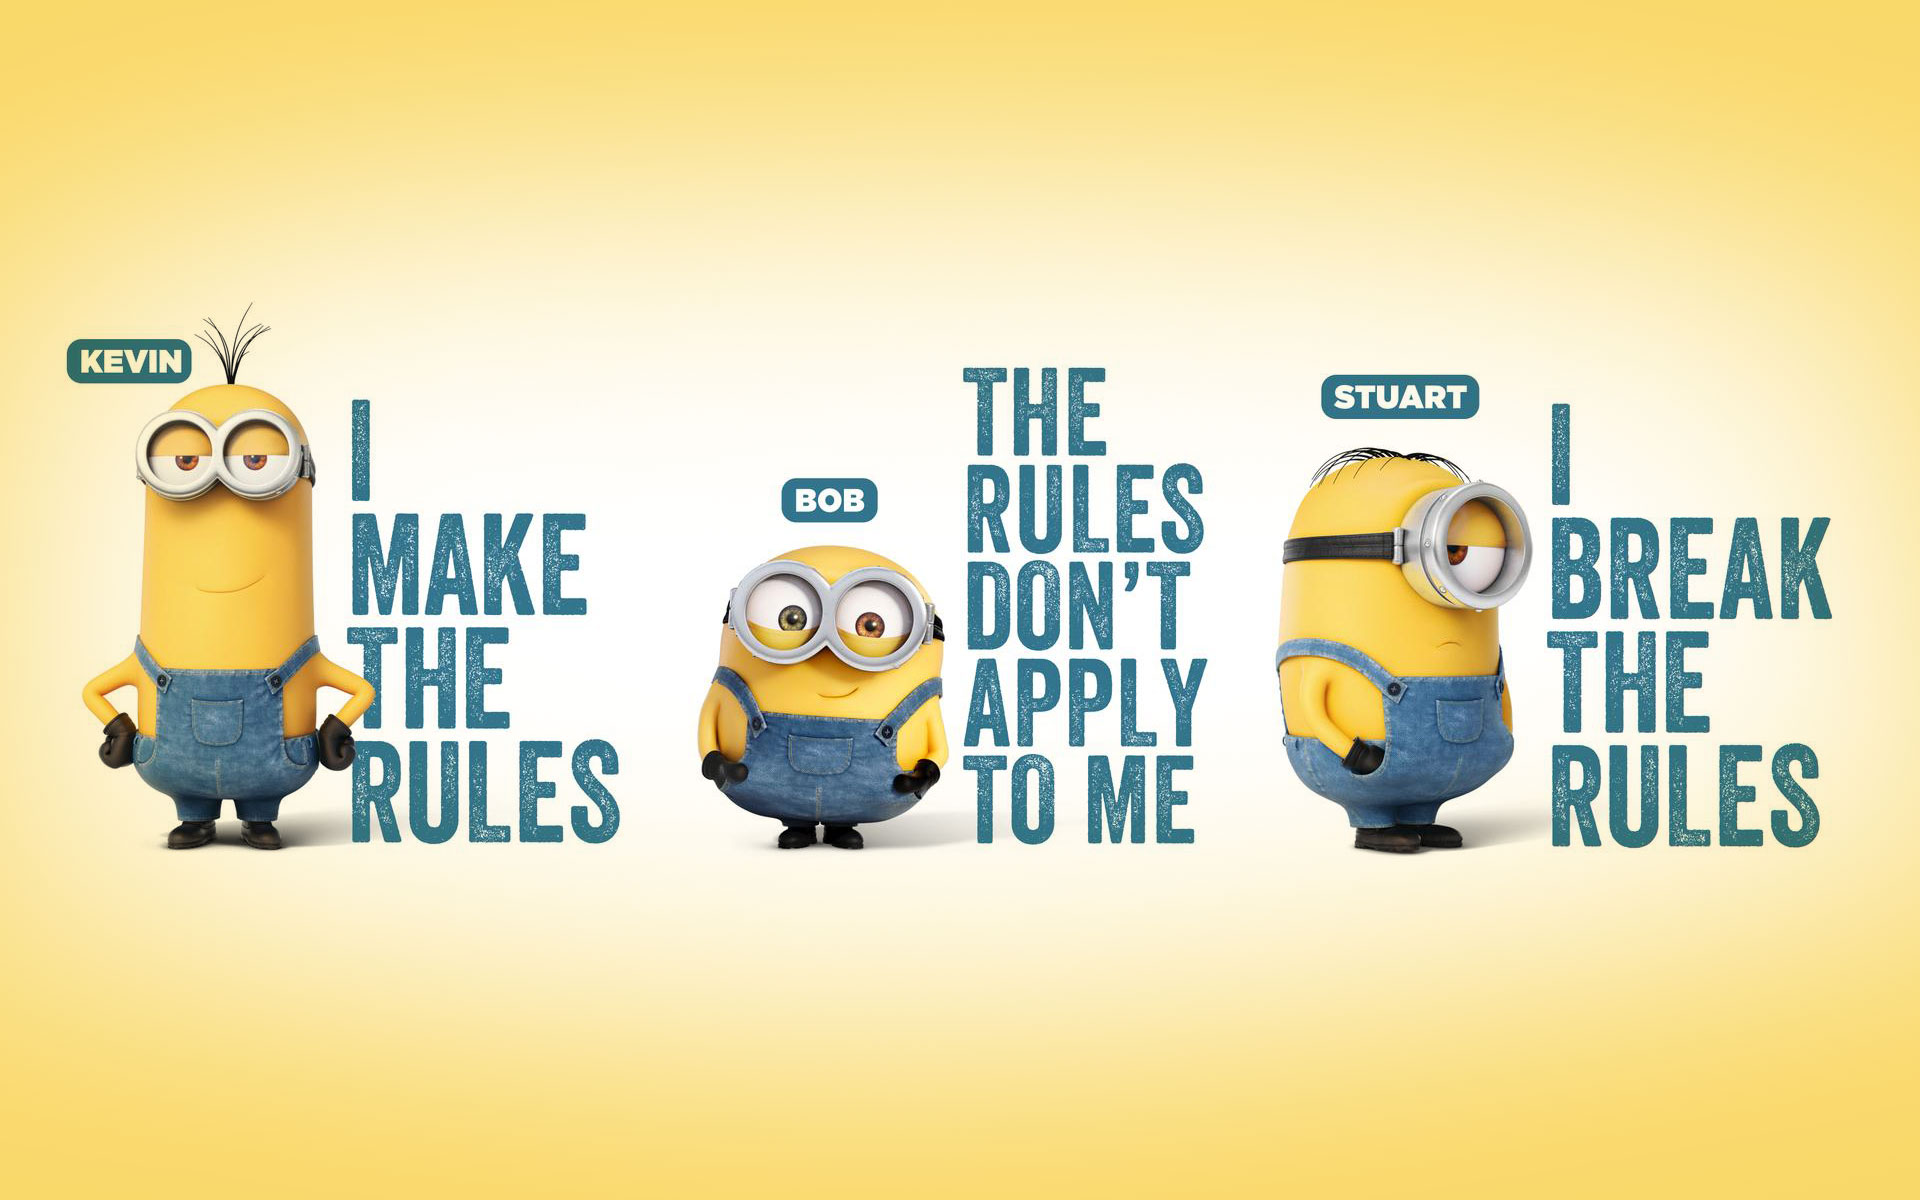 A Cute Collection Of Minions Movie 2015 Desktop